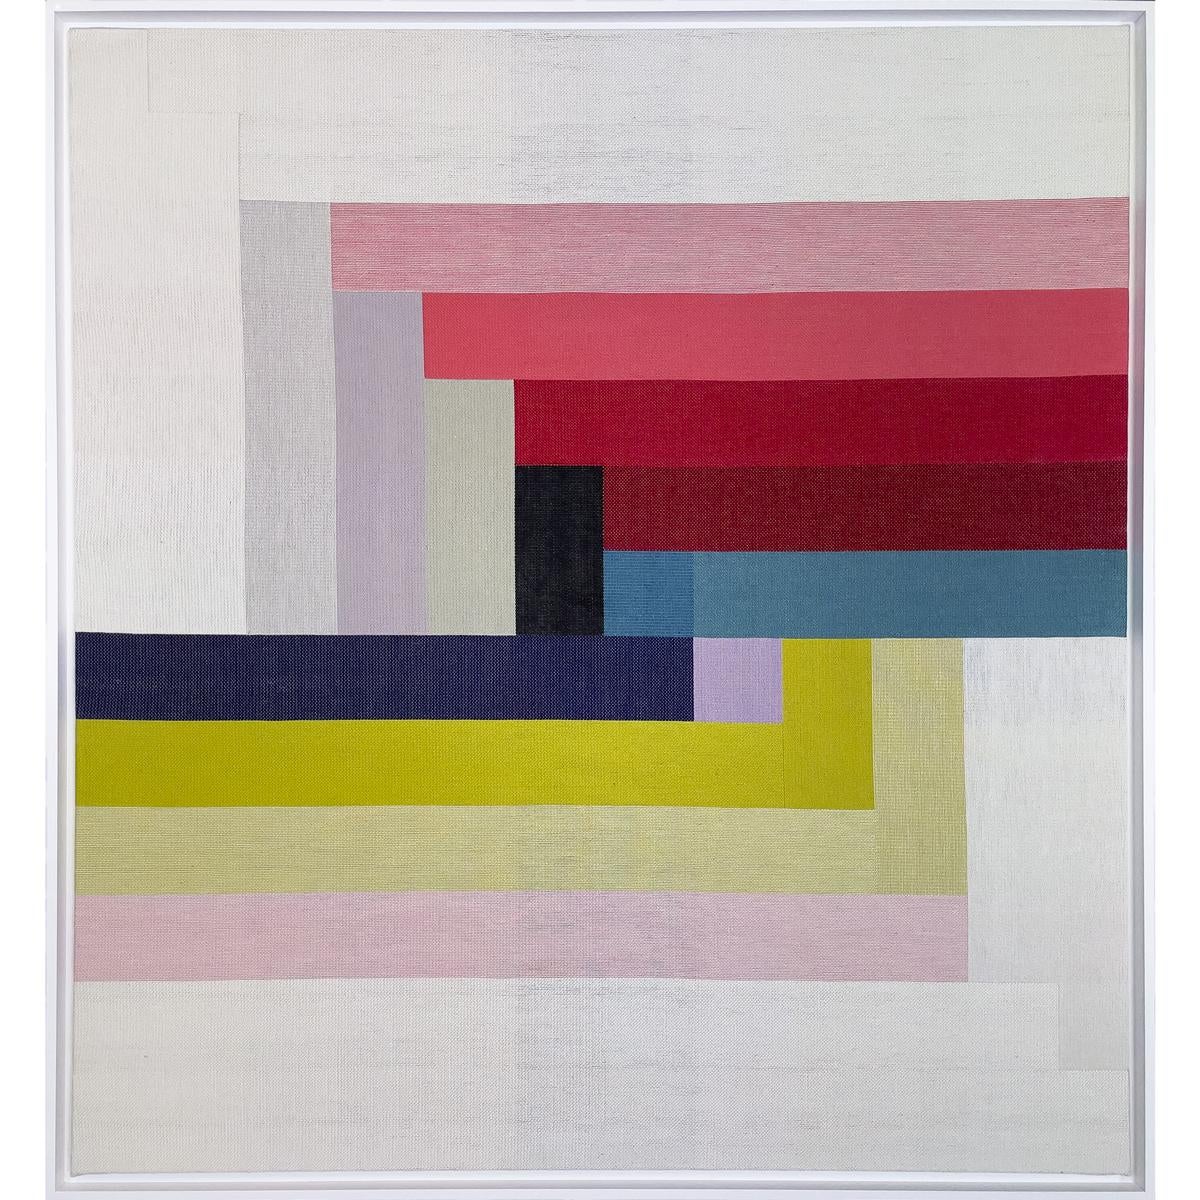 Carré Series, Work V, Margo Selby, 2022, Handwoven stretched lampas panel